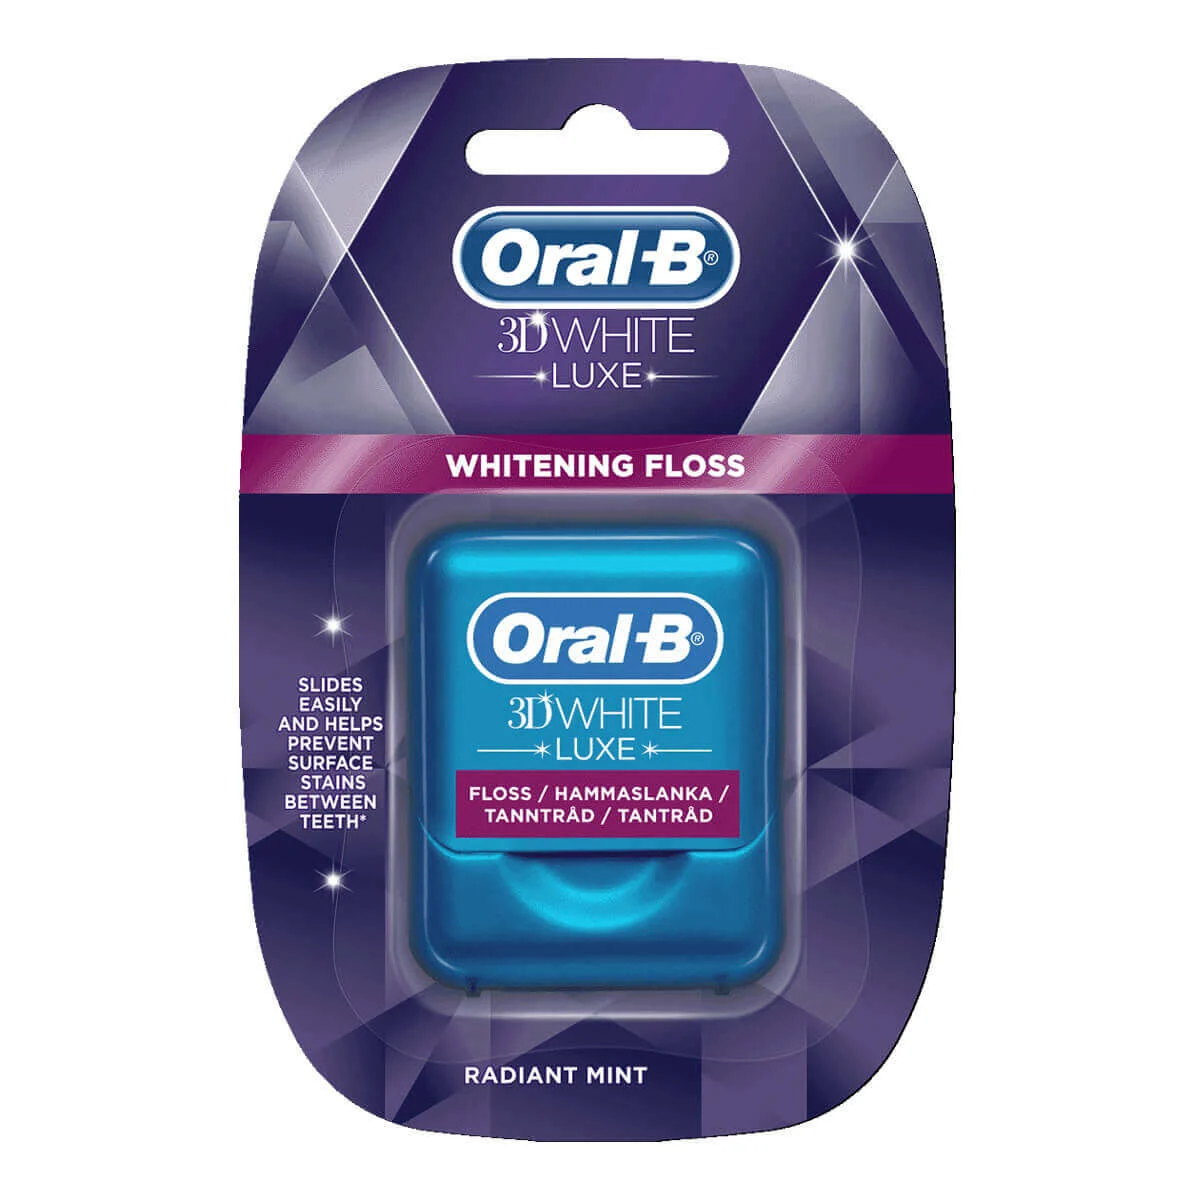 Oral-B 3D White Luxe Whitening tandtråd 